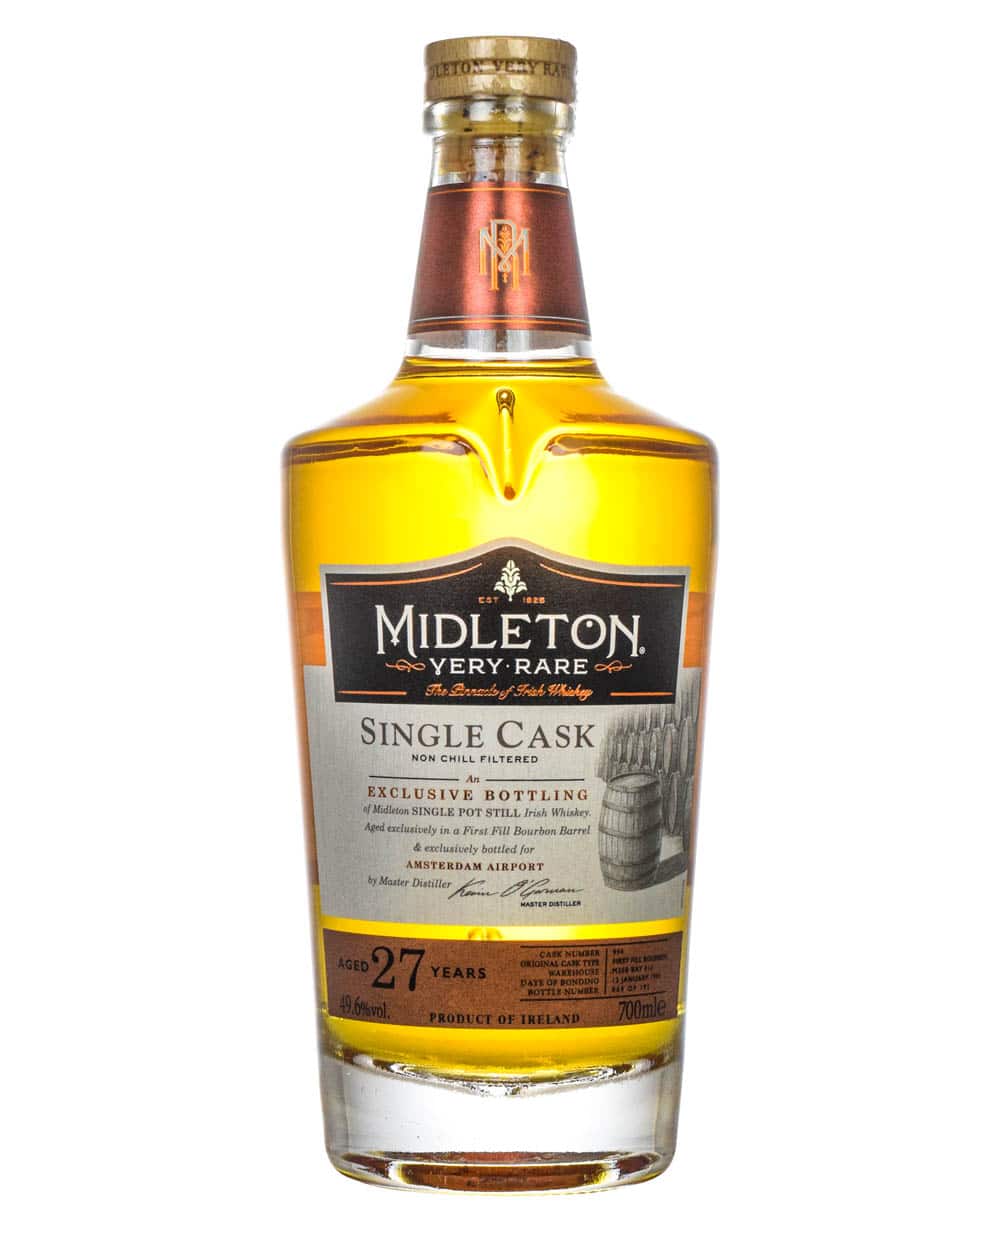 Midleton 27 Years Old Exclusive Bottling Bottled For Amsterdam Airport 1995 Must Have Malts